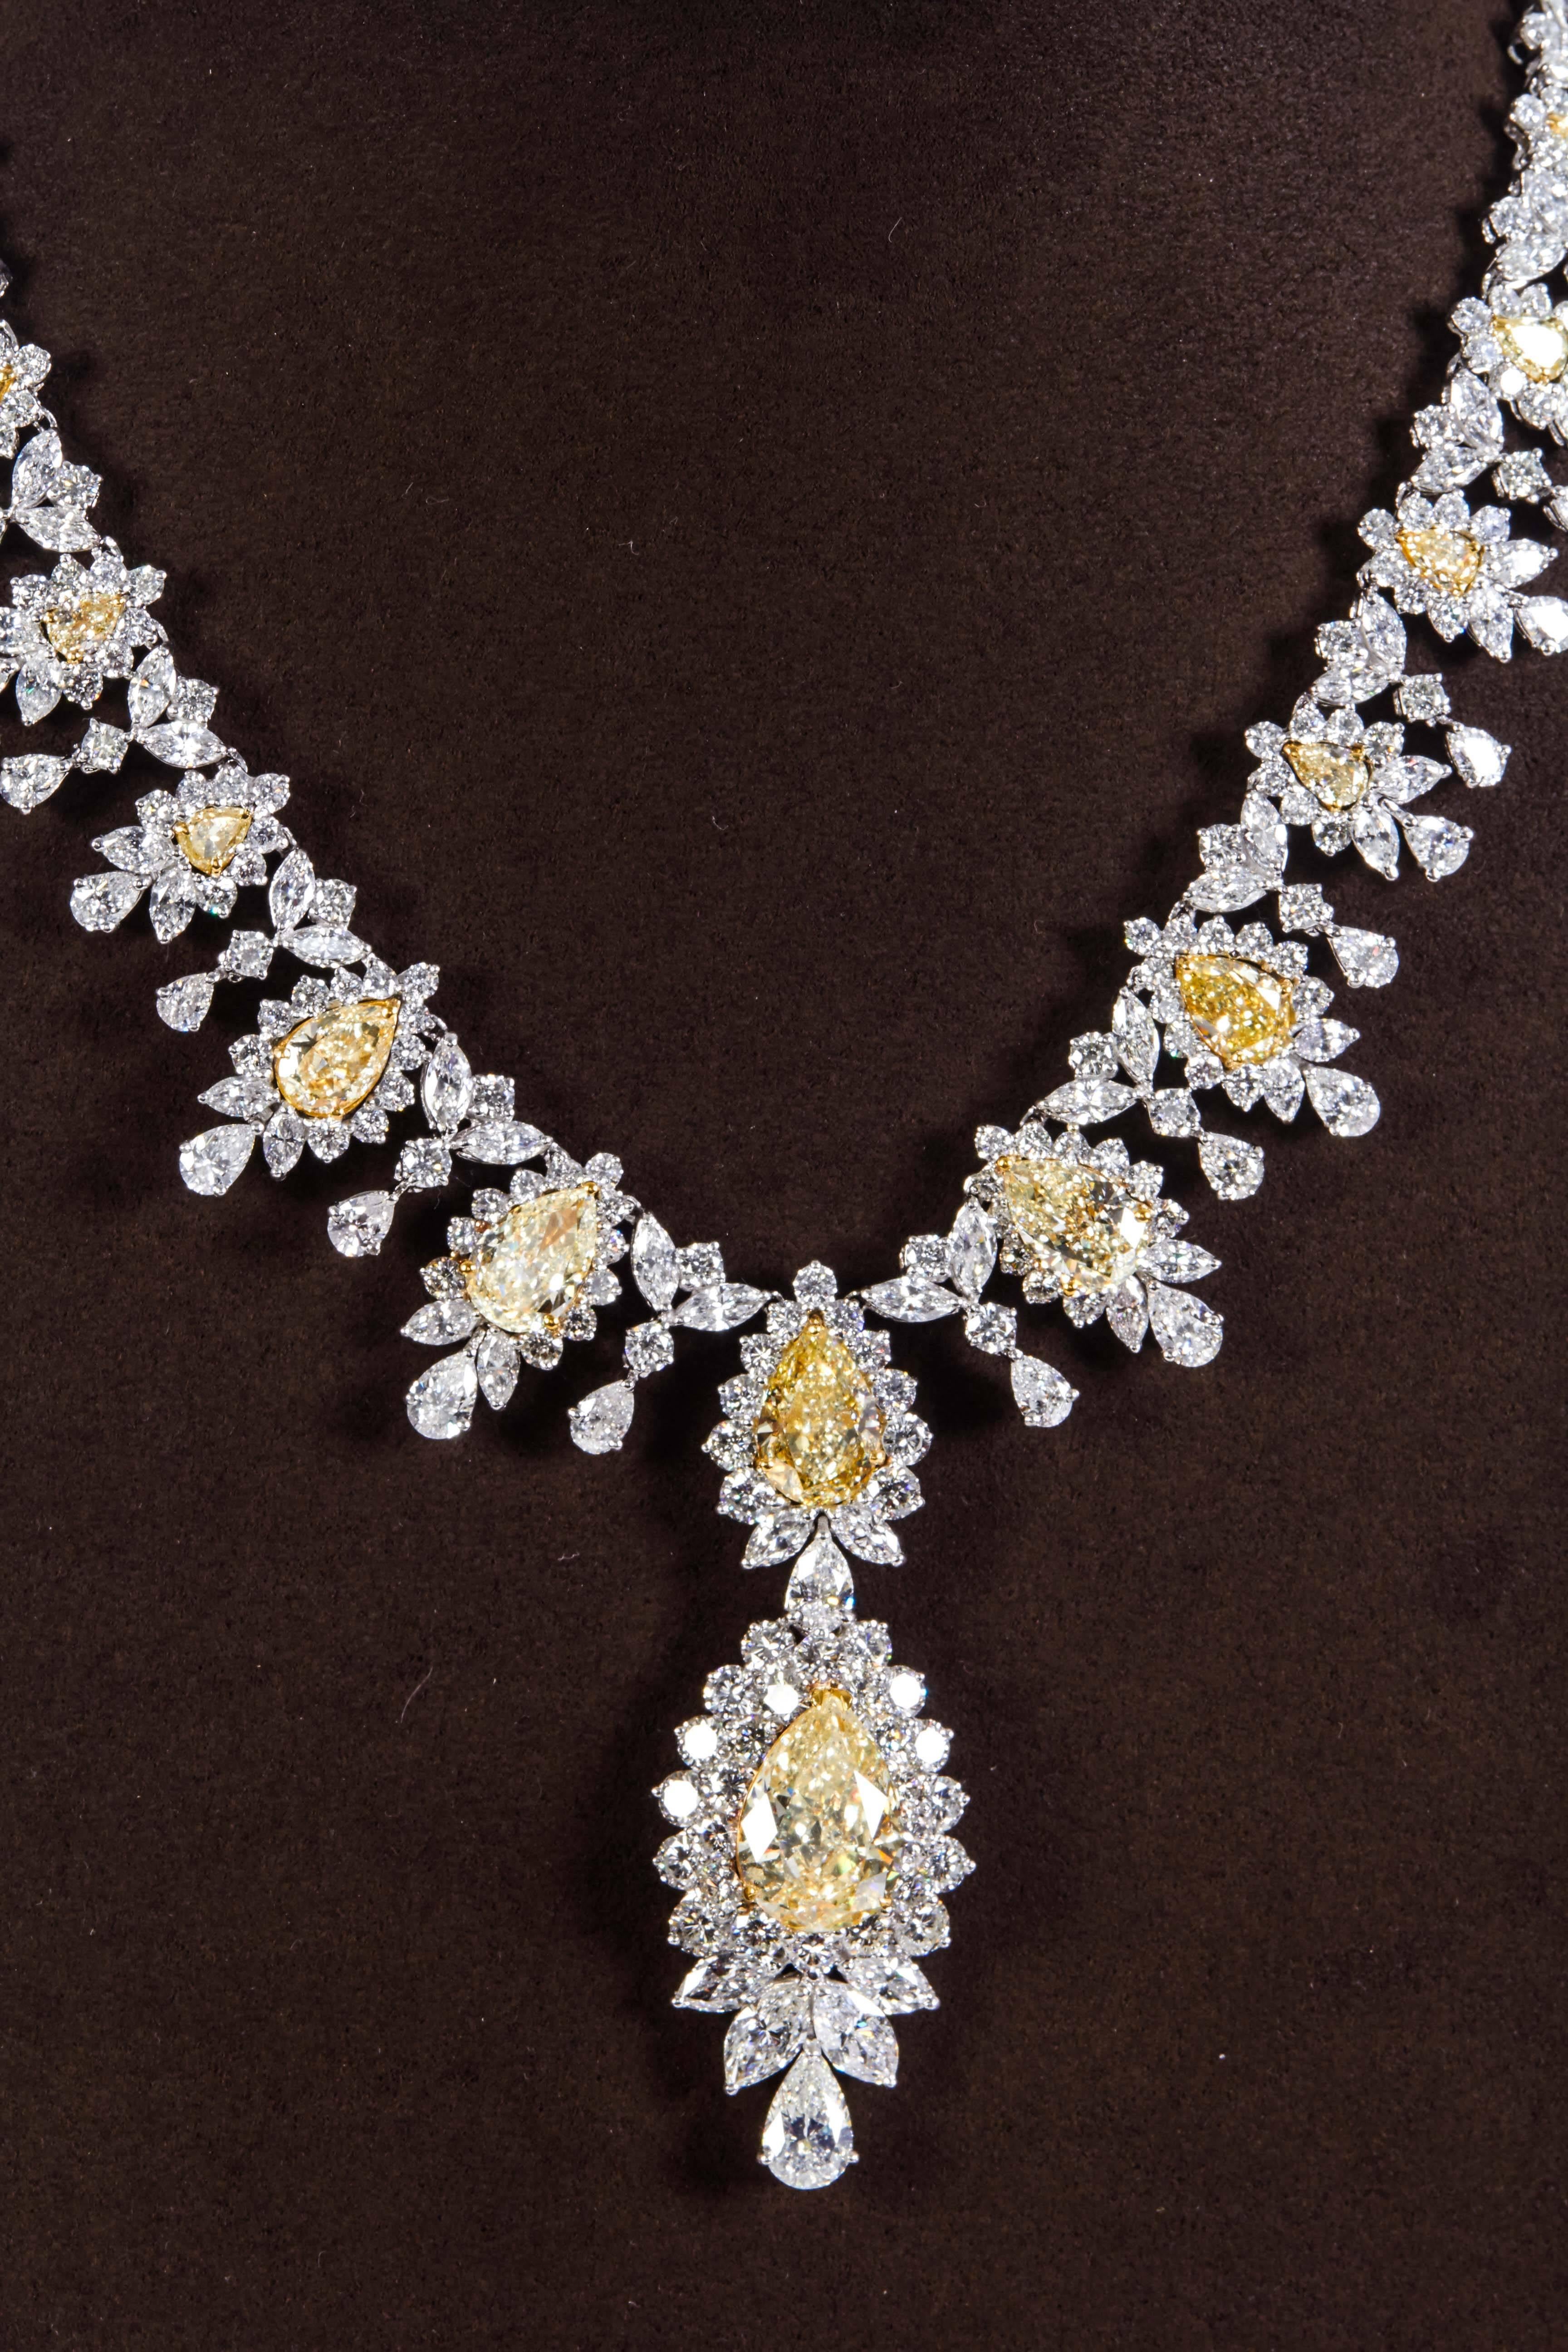 

A beautiful and important yellow diamond necklace with yellow diamond drop.

31.86 carats of yellow diamonds and 68.35 carats of white diamonds set in 18k yellow gold and platinum. 

The necklace features an over 9 carat pear shape drop as